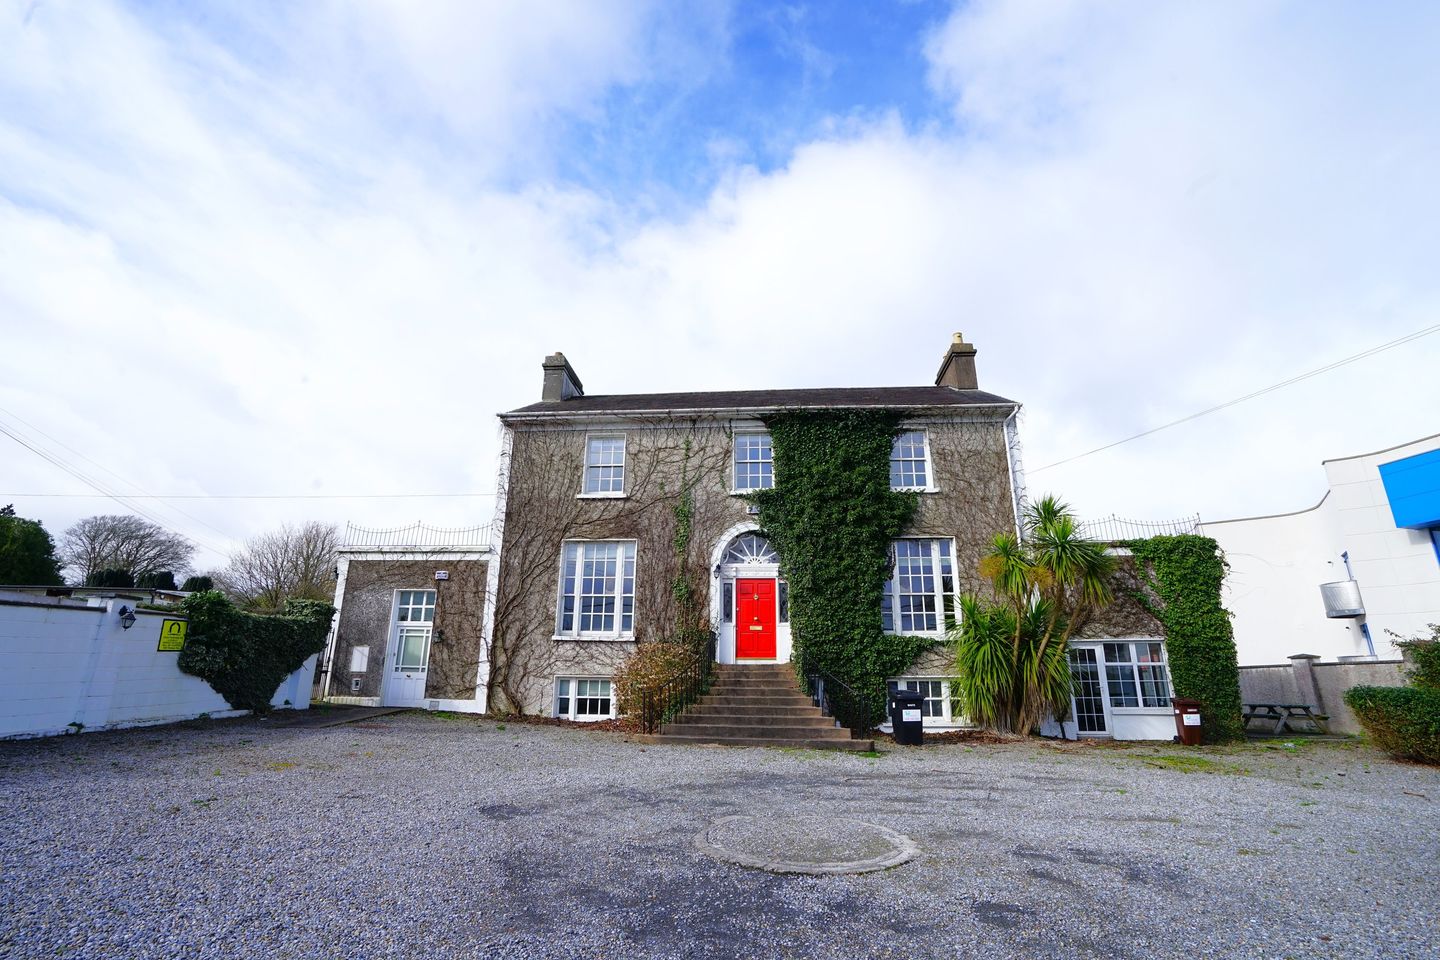 Elysium House, Ballytruckle Road, Waterford, Waterford City, Co. Waterford, X91HX8N